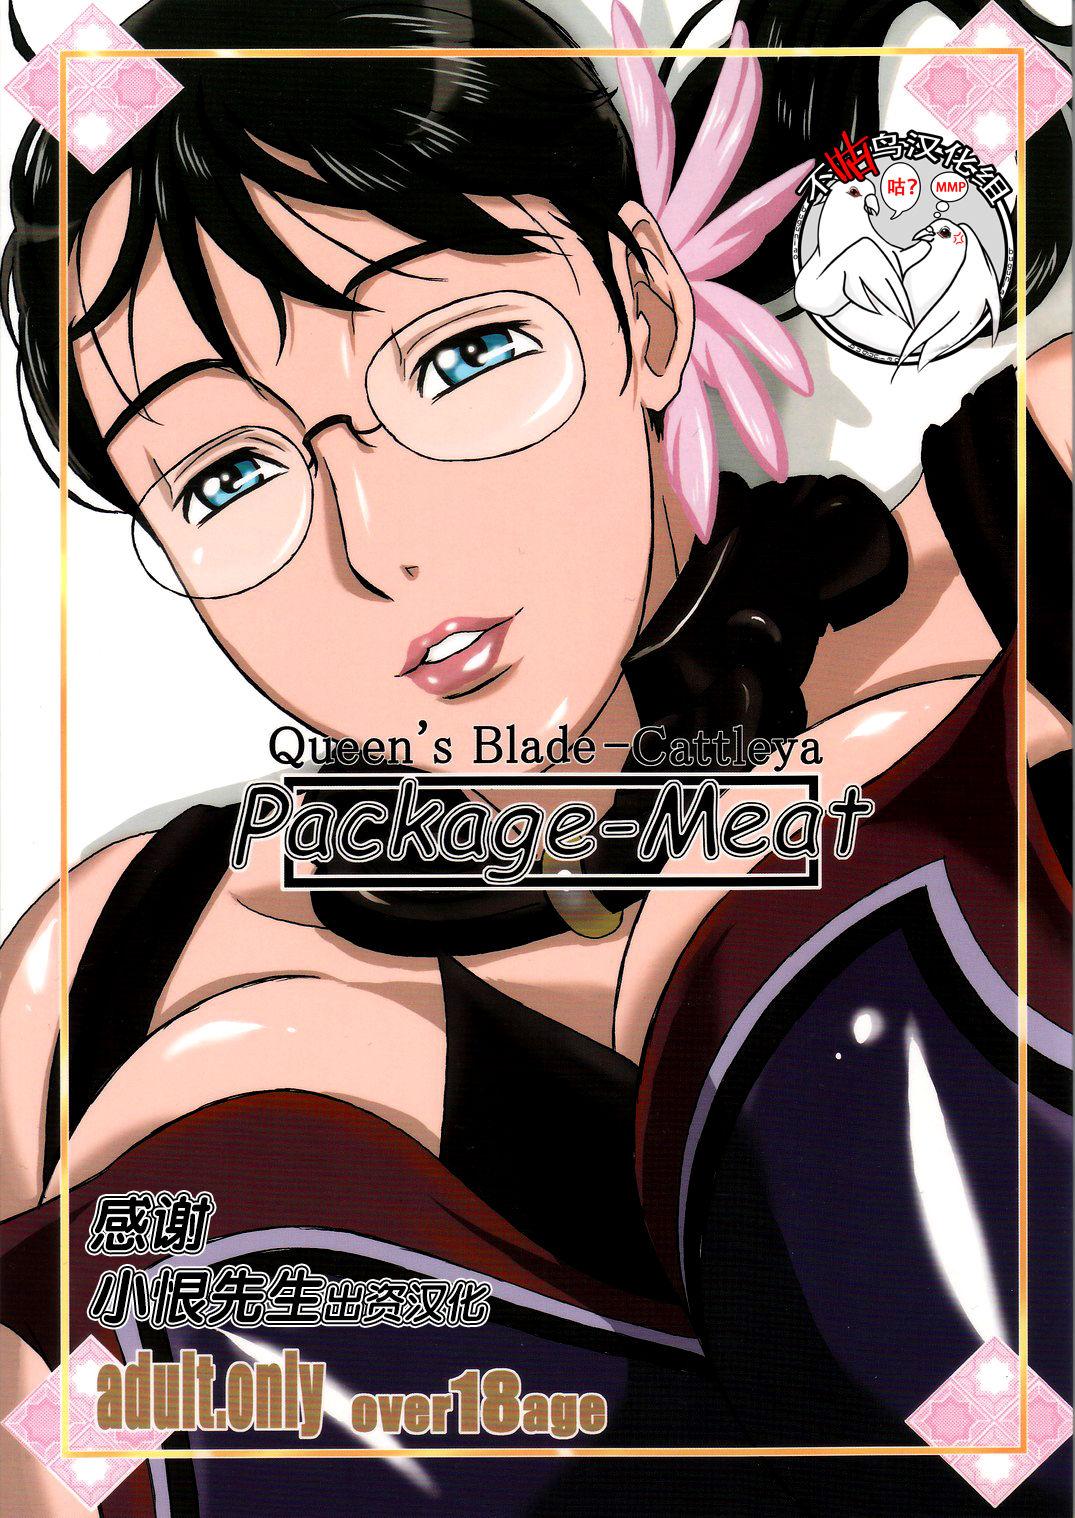 Negro (C72) [Shiawase Pullin Dou (Ninroku)] Package Meat (Queen's Blade) [Chinese] amateur coloring version - Queens blade Jerk Off - Picture 1